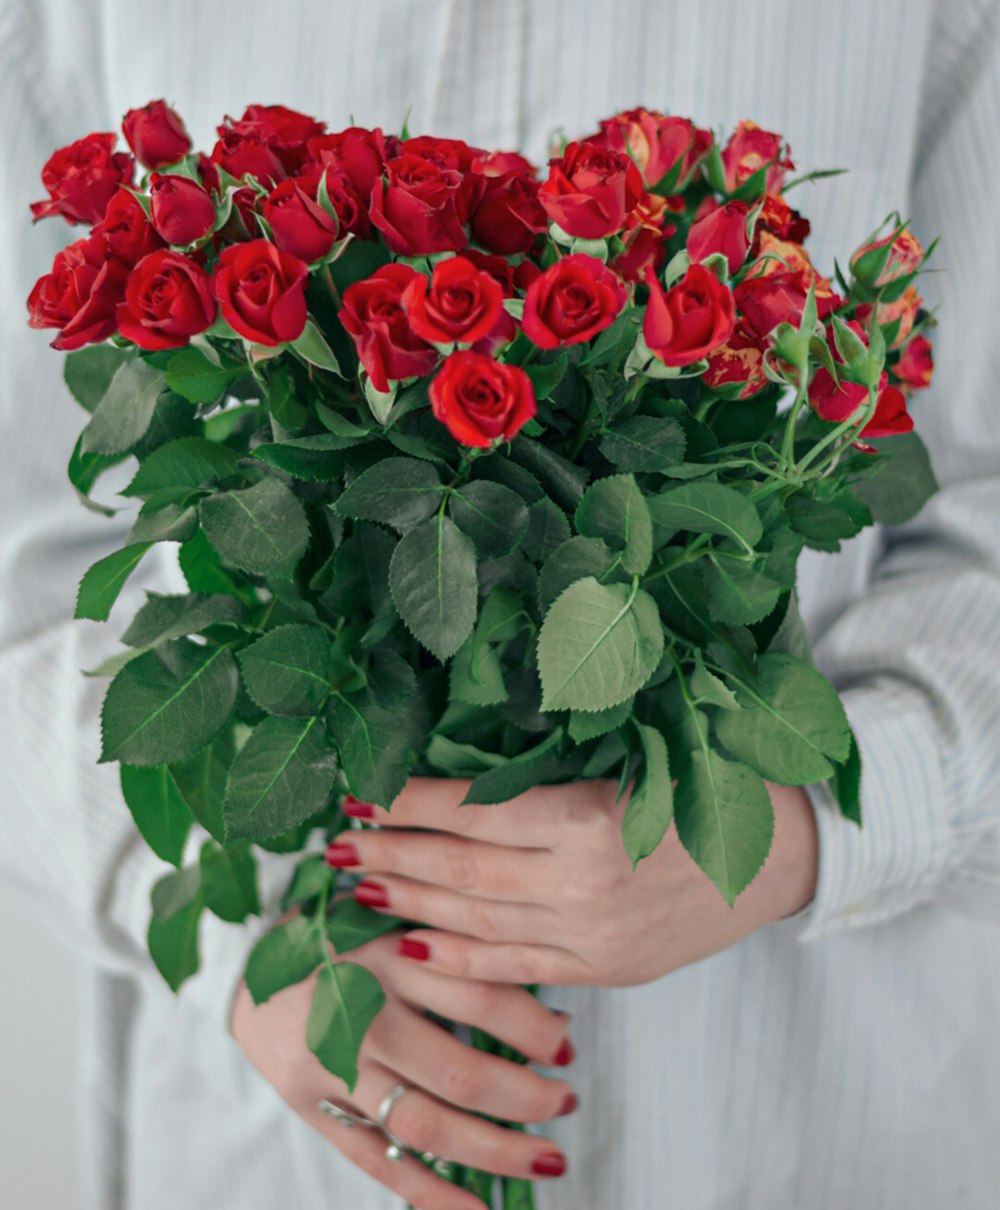 person holding red rose bouquet